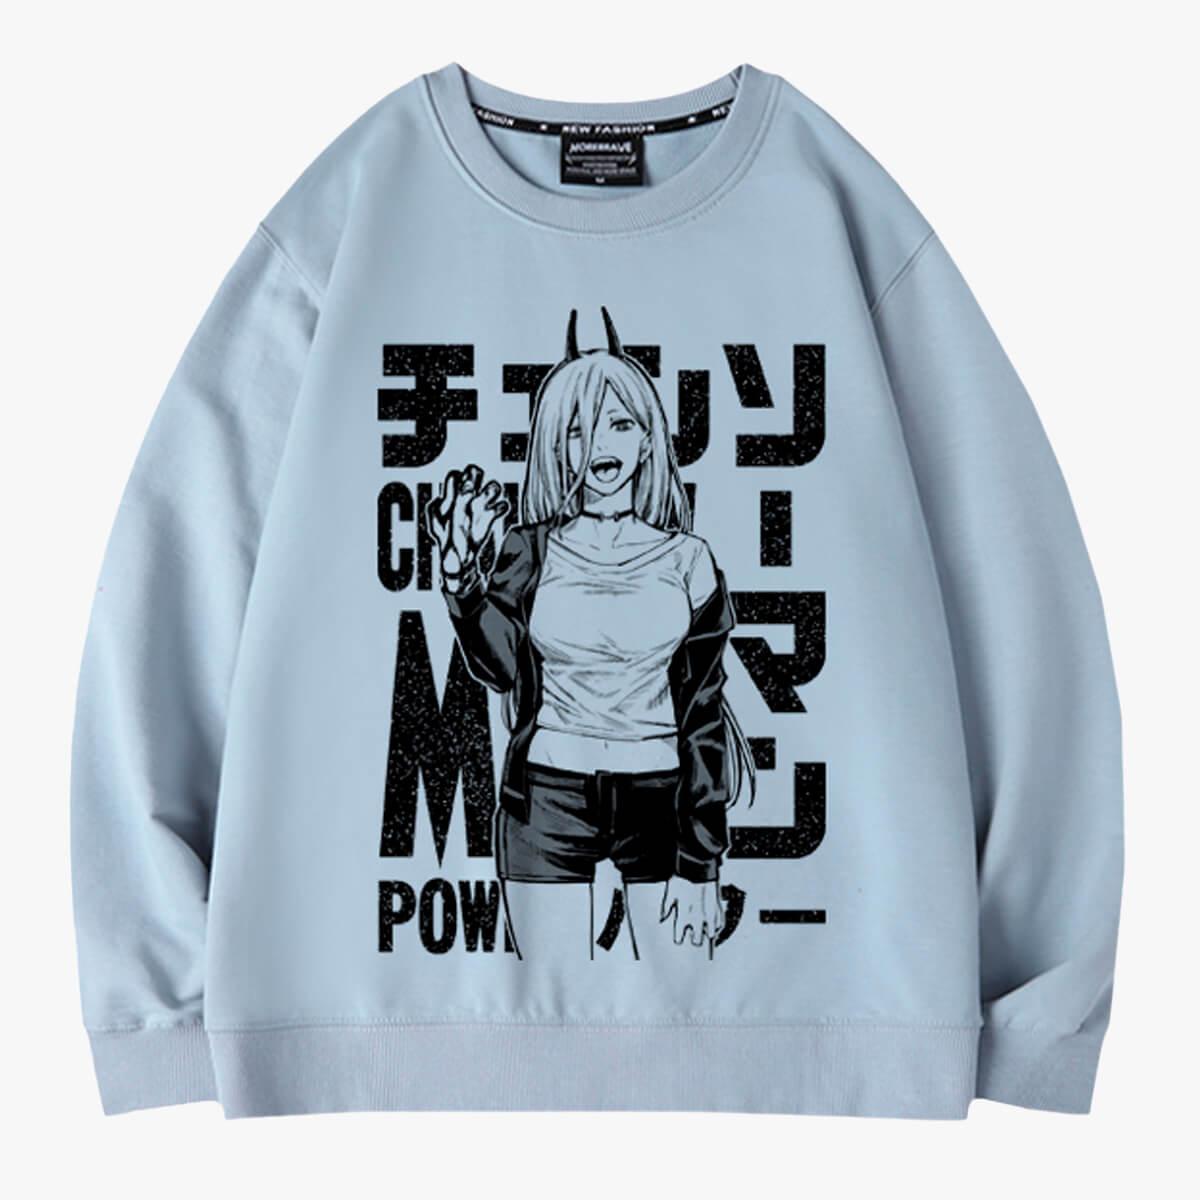 Chainsaw Man Power Bloody Hand Sweatshirt - Aesthetic Clothes Shop